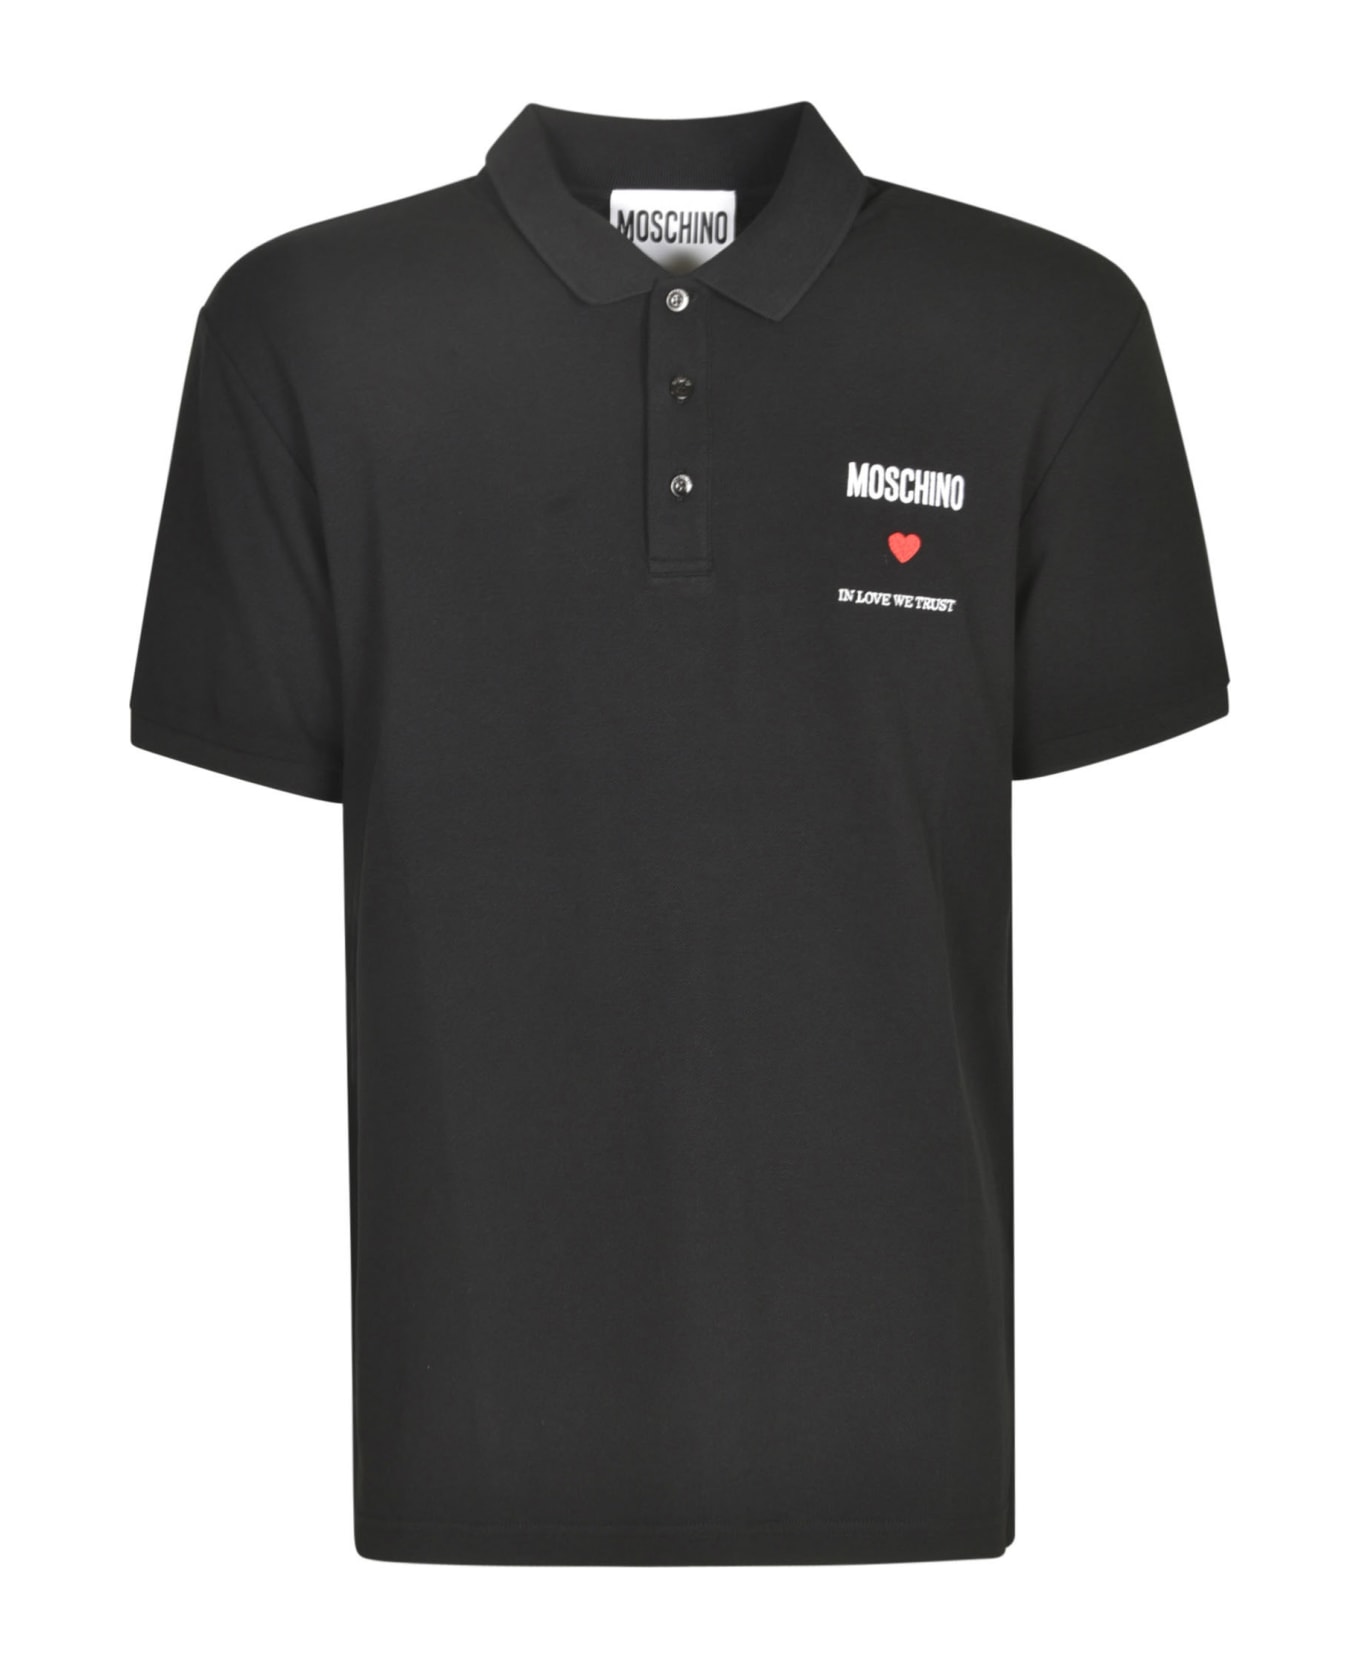 Moschino In Love We Trust Polo Shirt - Black シャツ